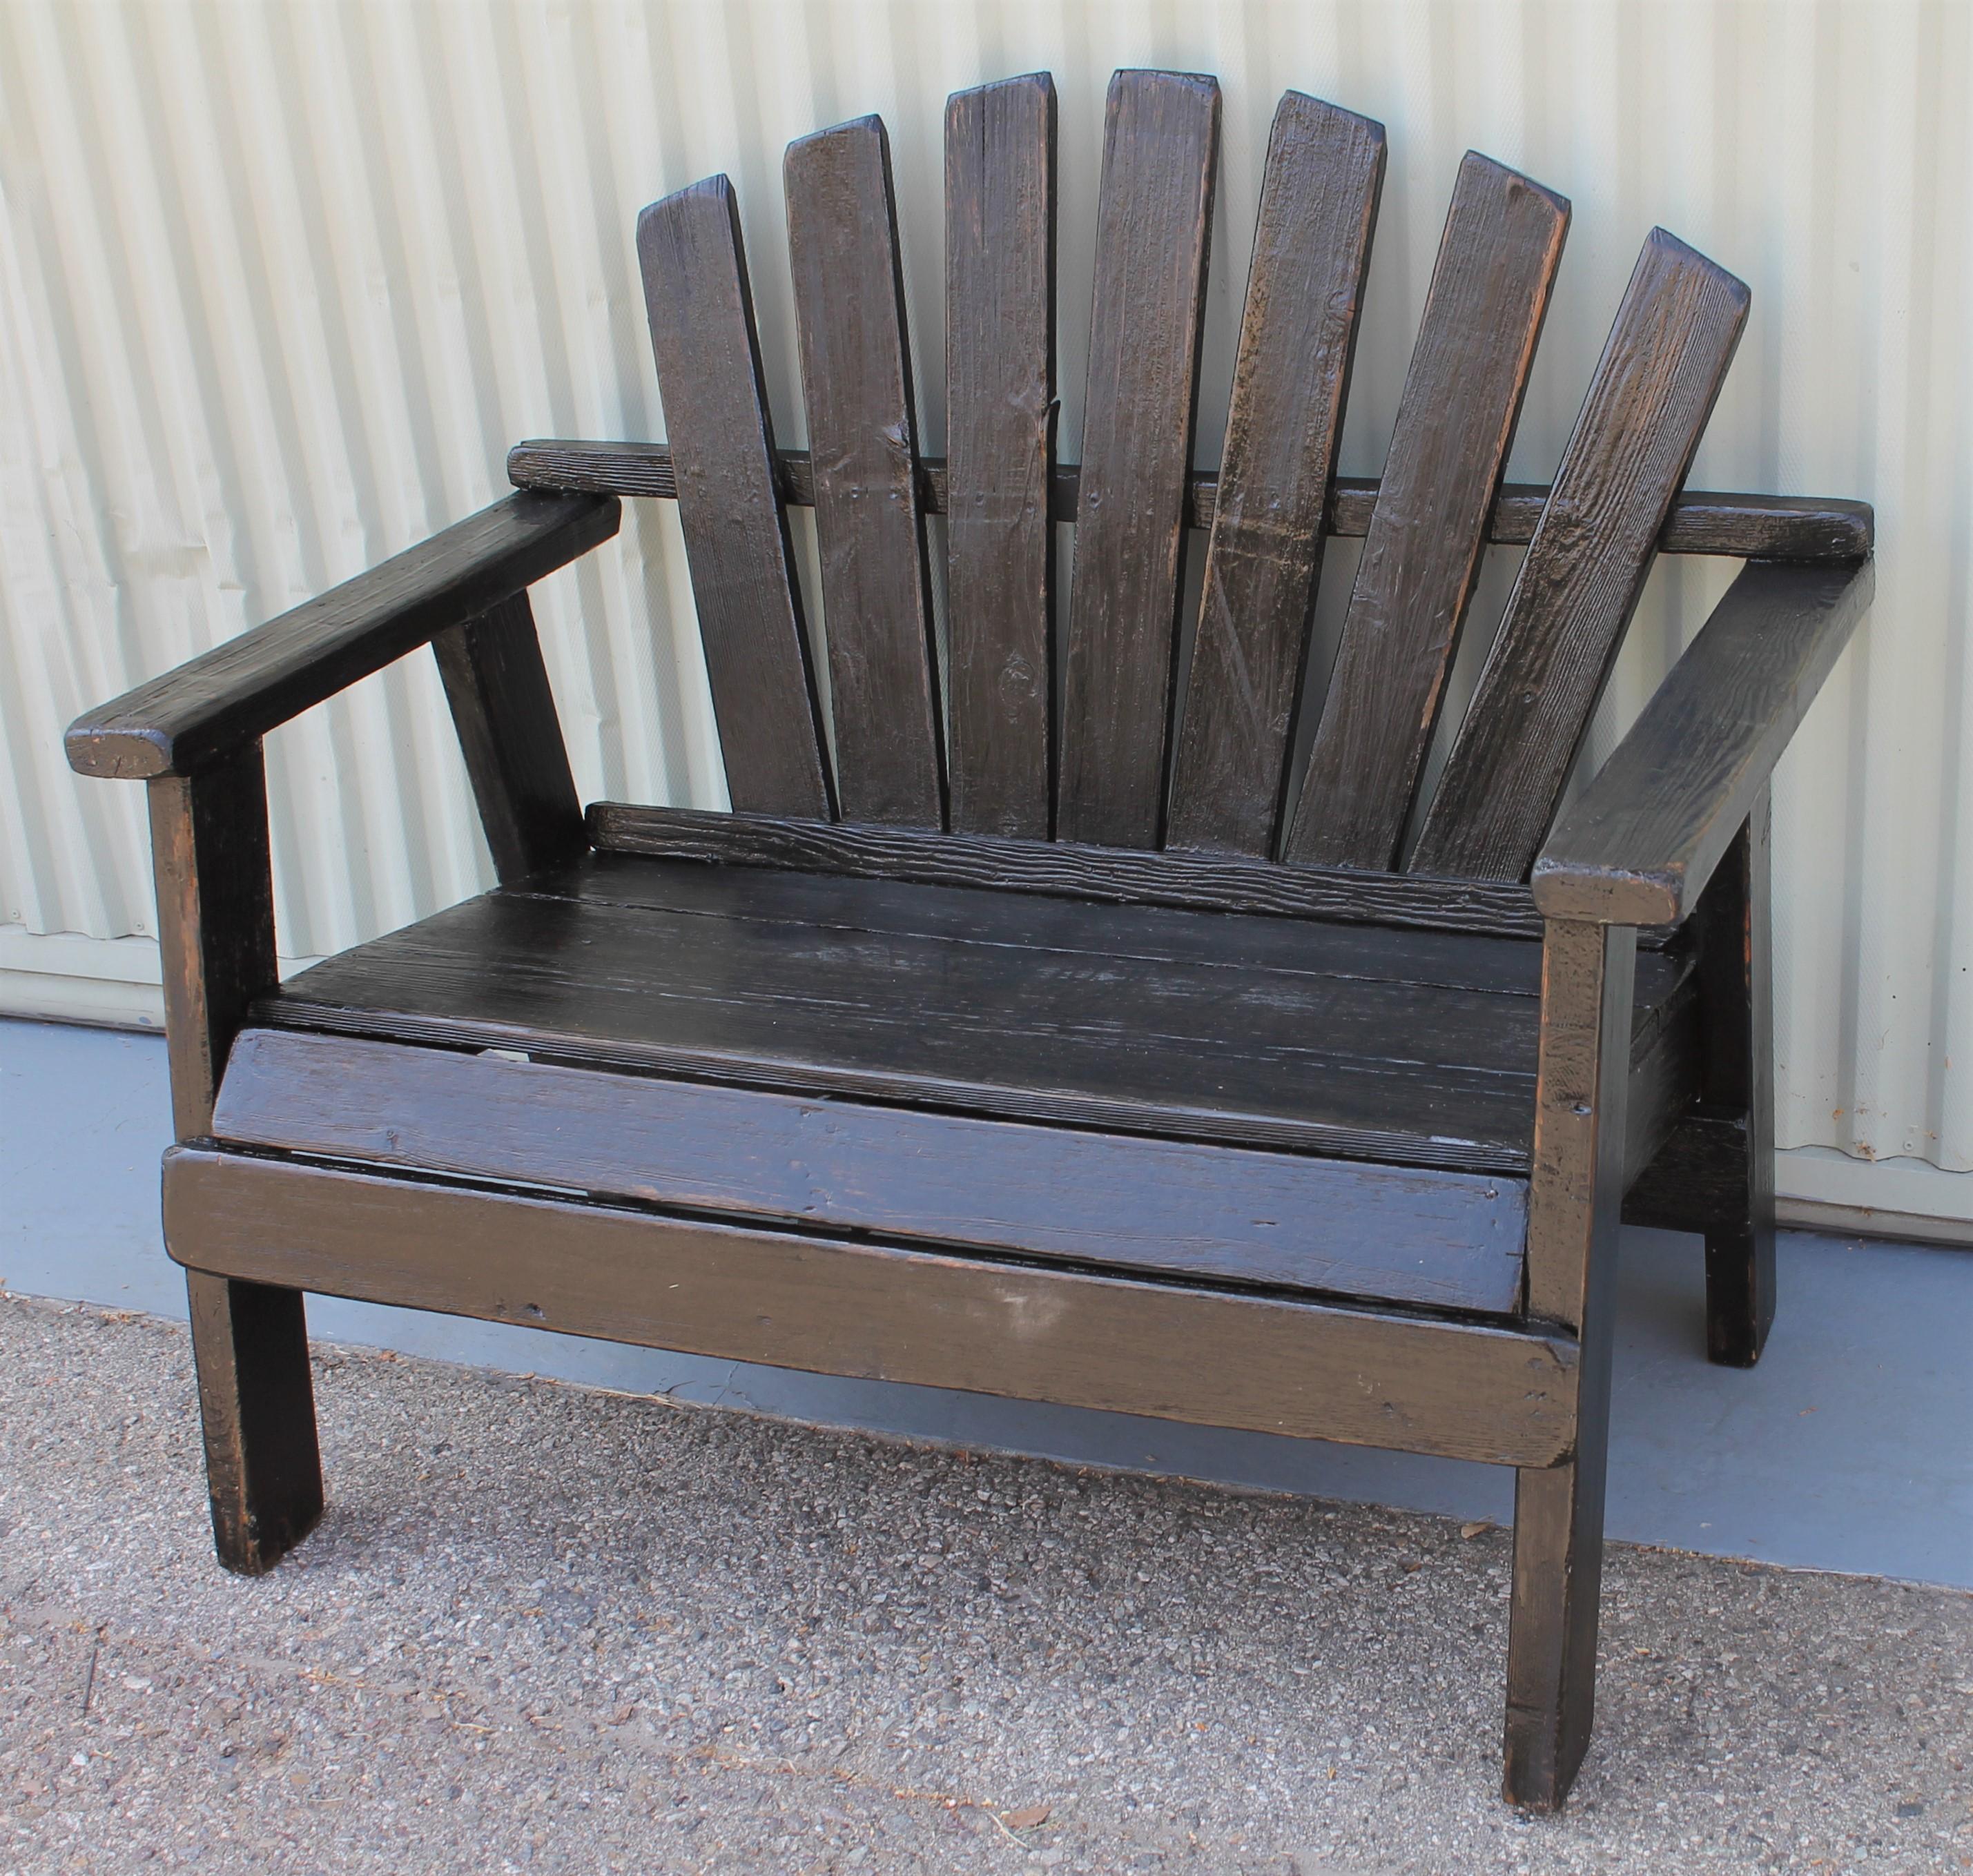 This fine bench is in old black worn paint with a coating of outdoor weather protector. It can be flat or satin surface but protects from rain or beach salt water air born. This settee comes from a mid-western cabin.